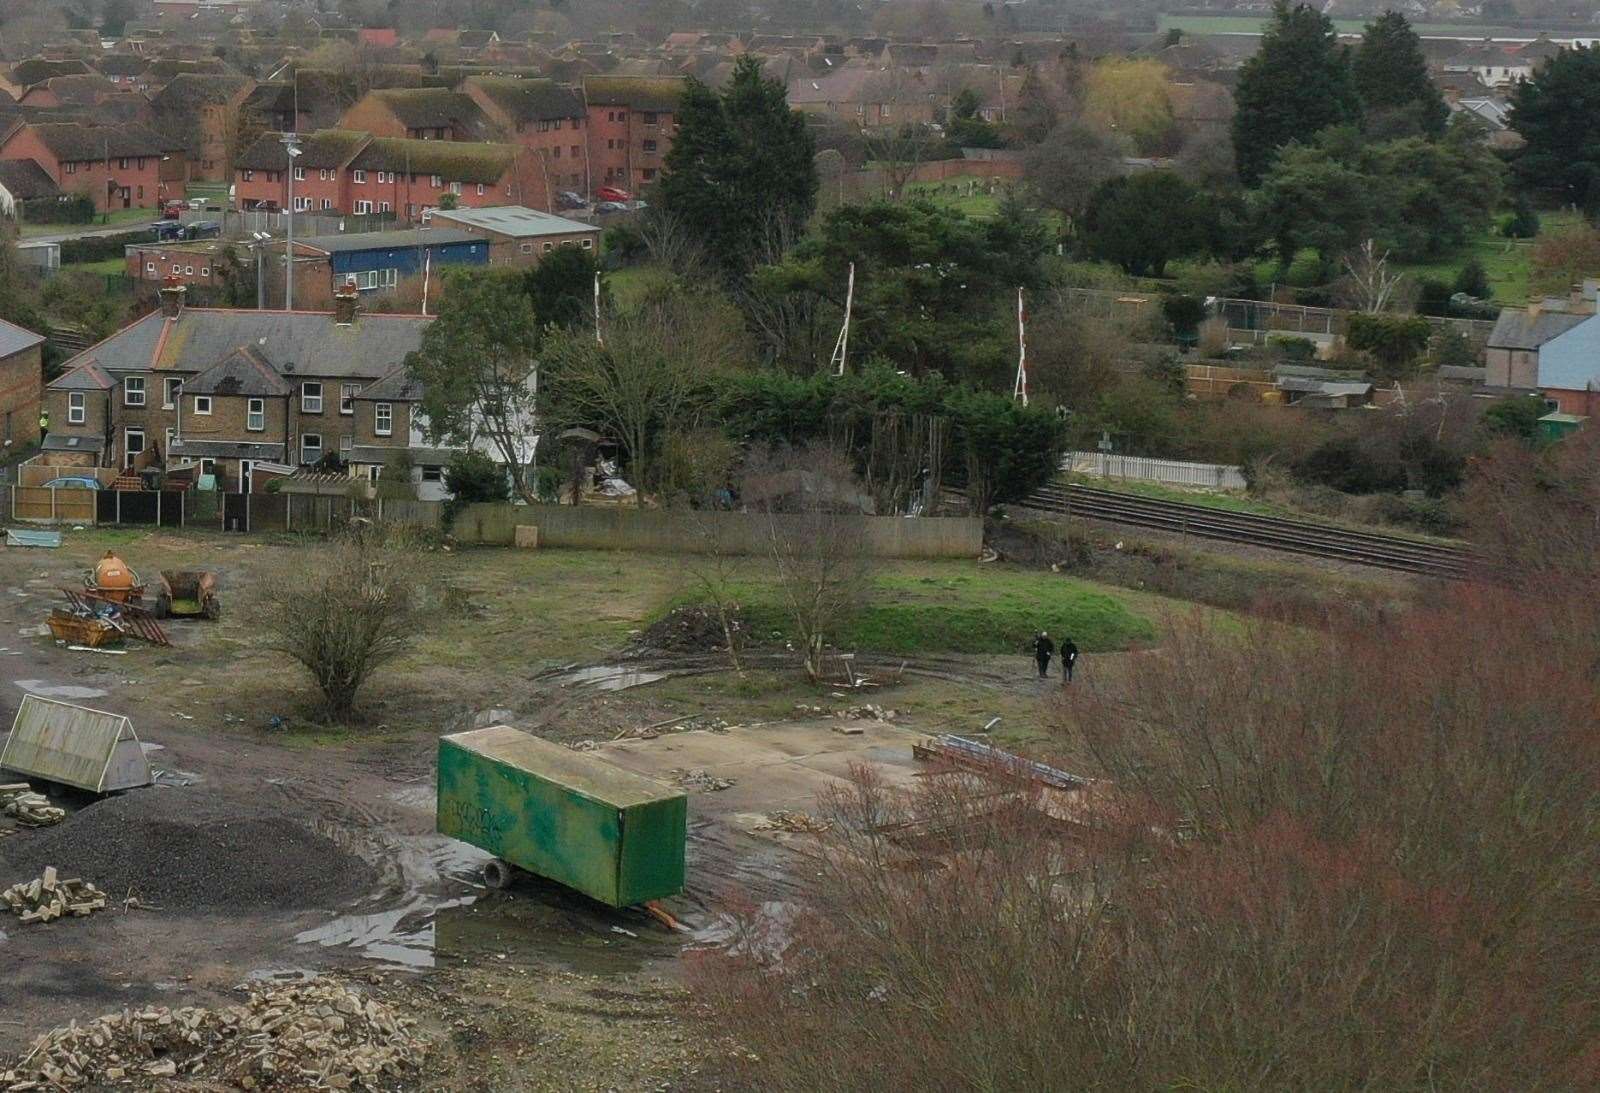 Police searching an abandoned builders' yard in Sandwich Picture: UKNIP